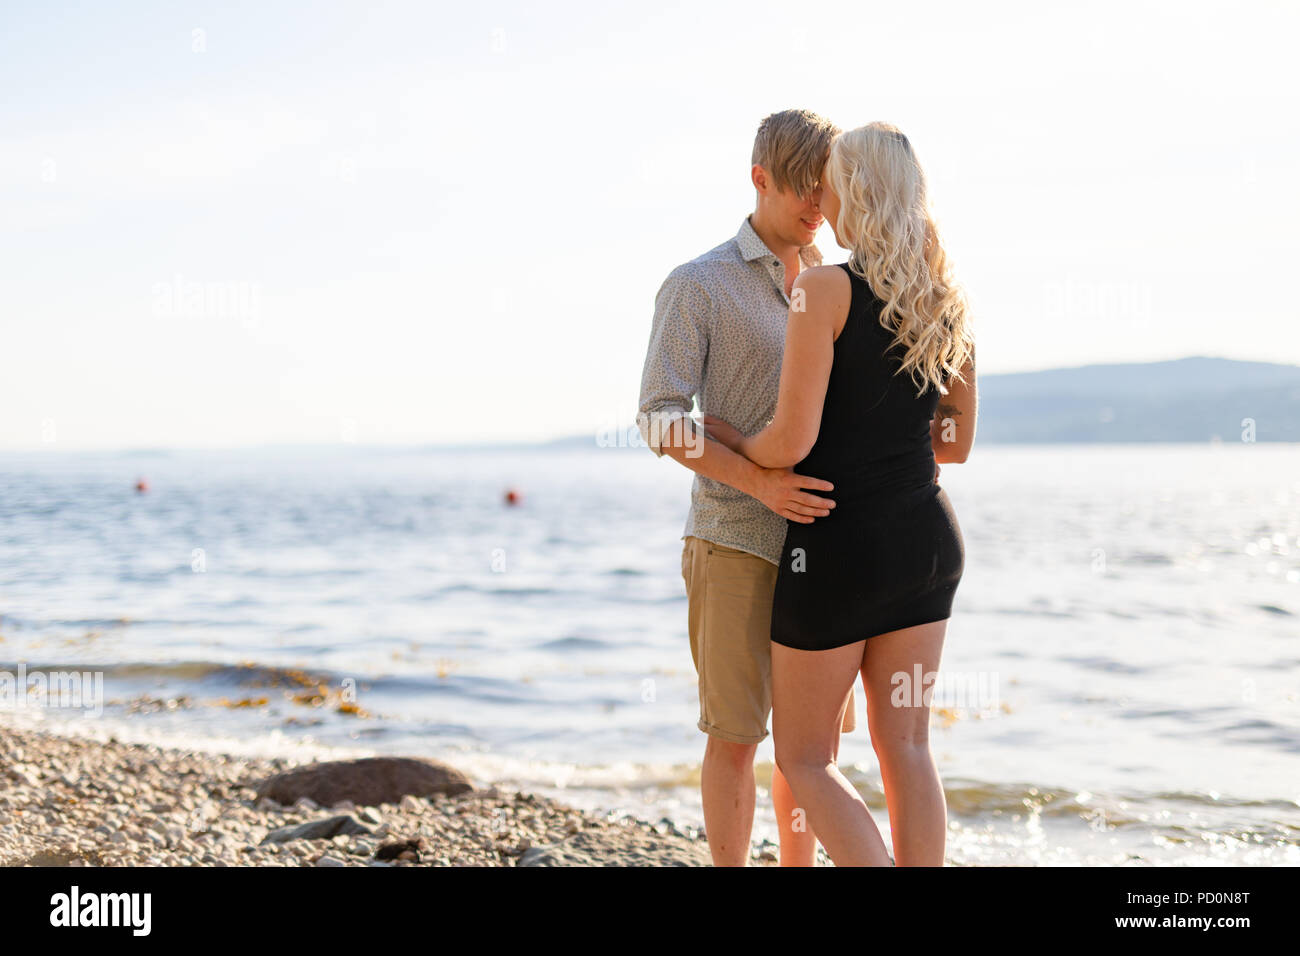 Beautiful young couple in romantic embrace on beach at summer Stock Photo